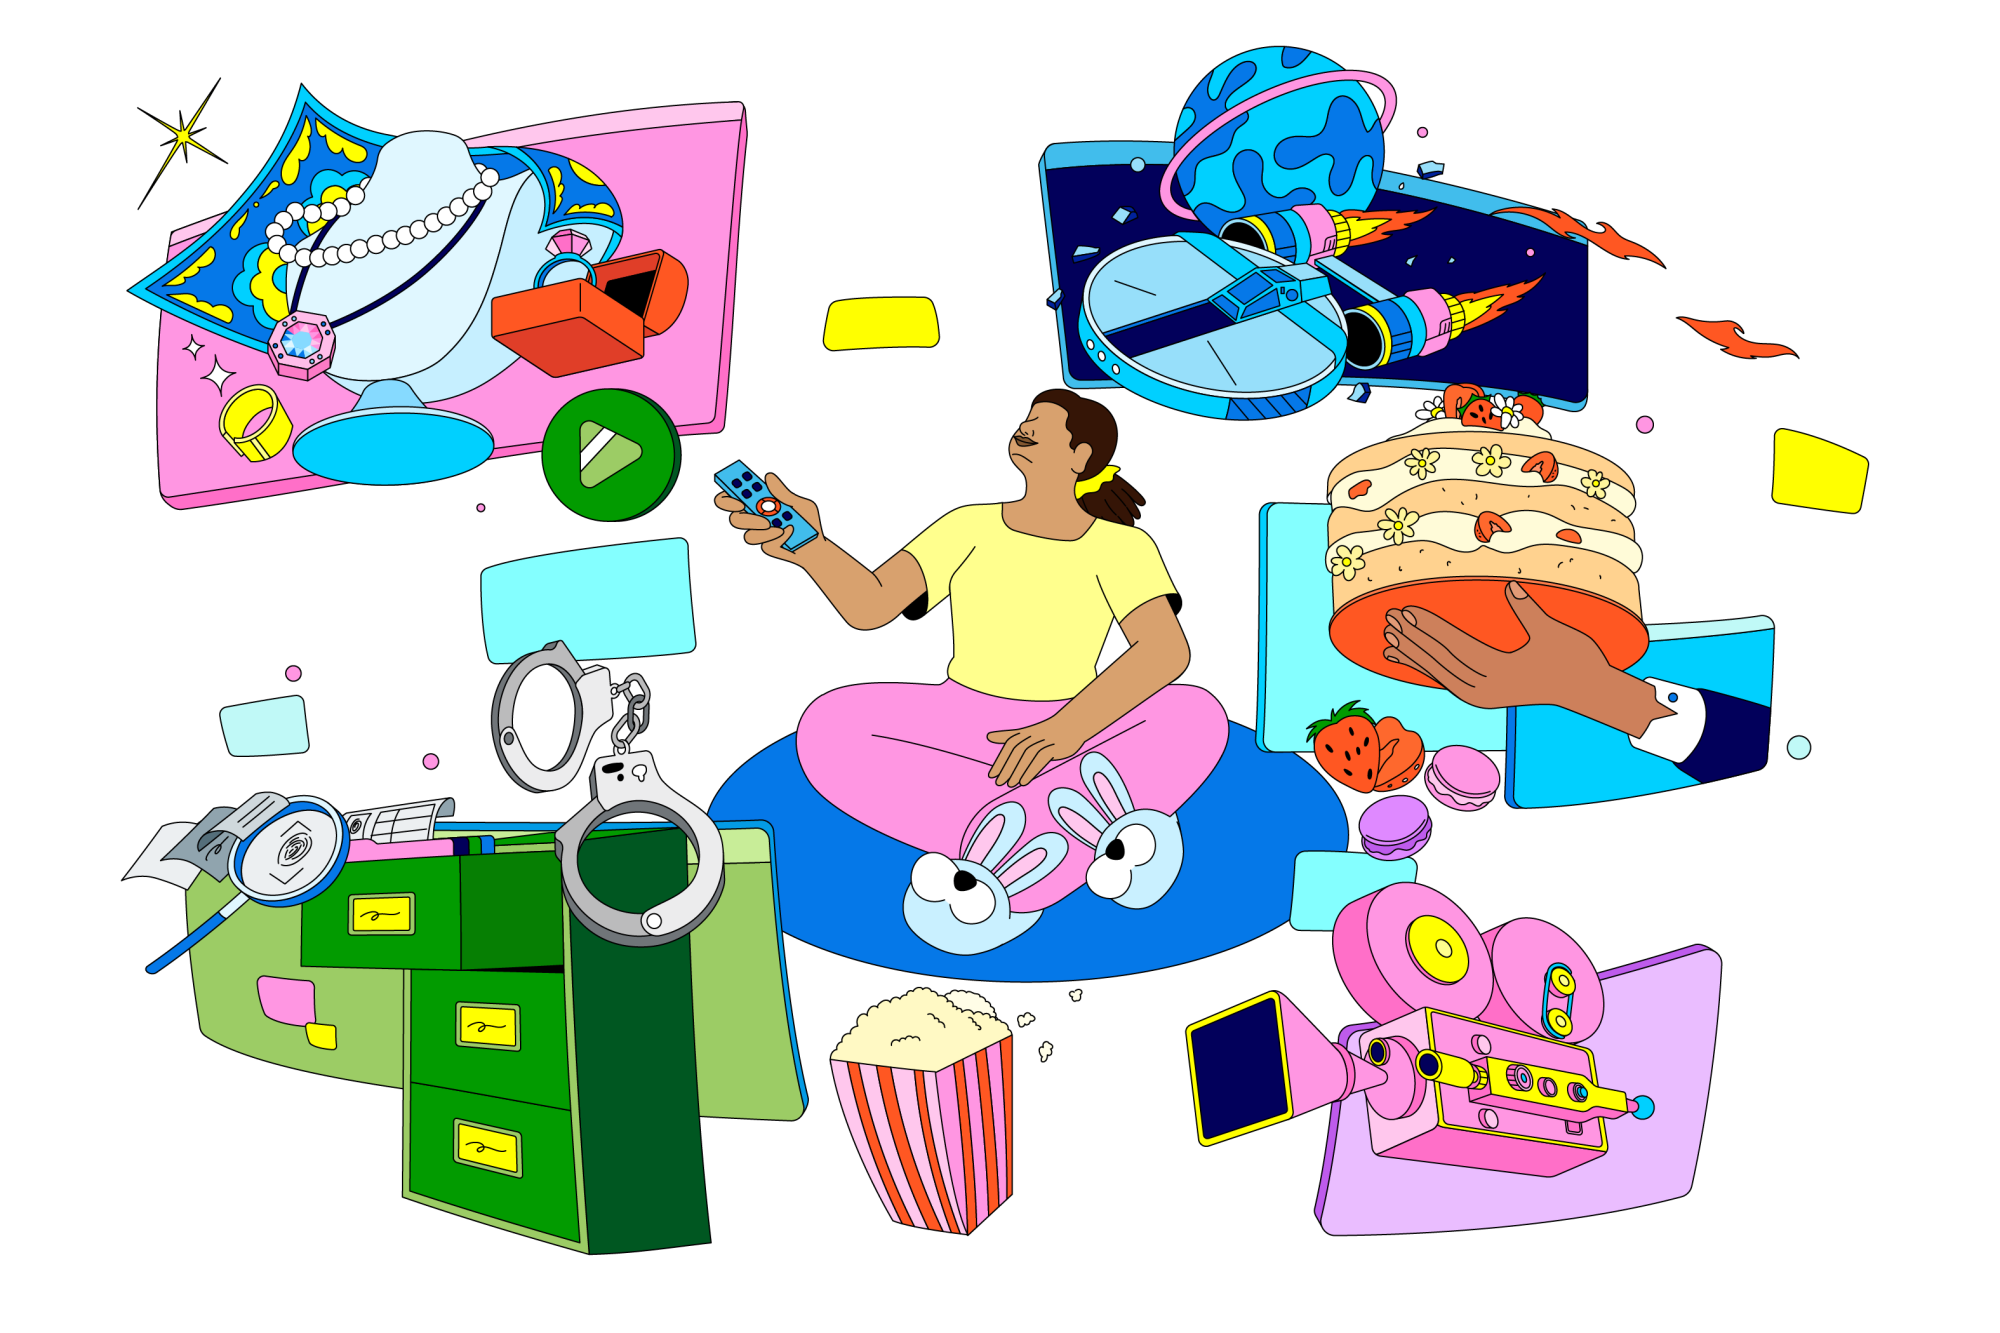 Illustration of a seated woman with remote control in hand, surrounded by various types of streaming content